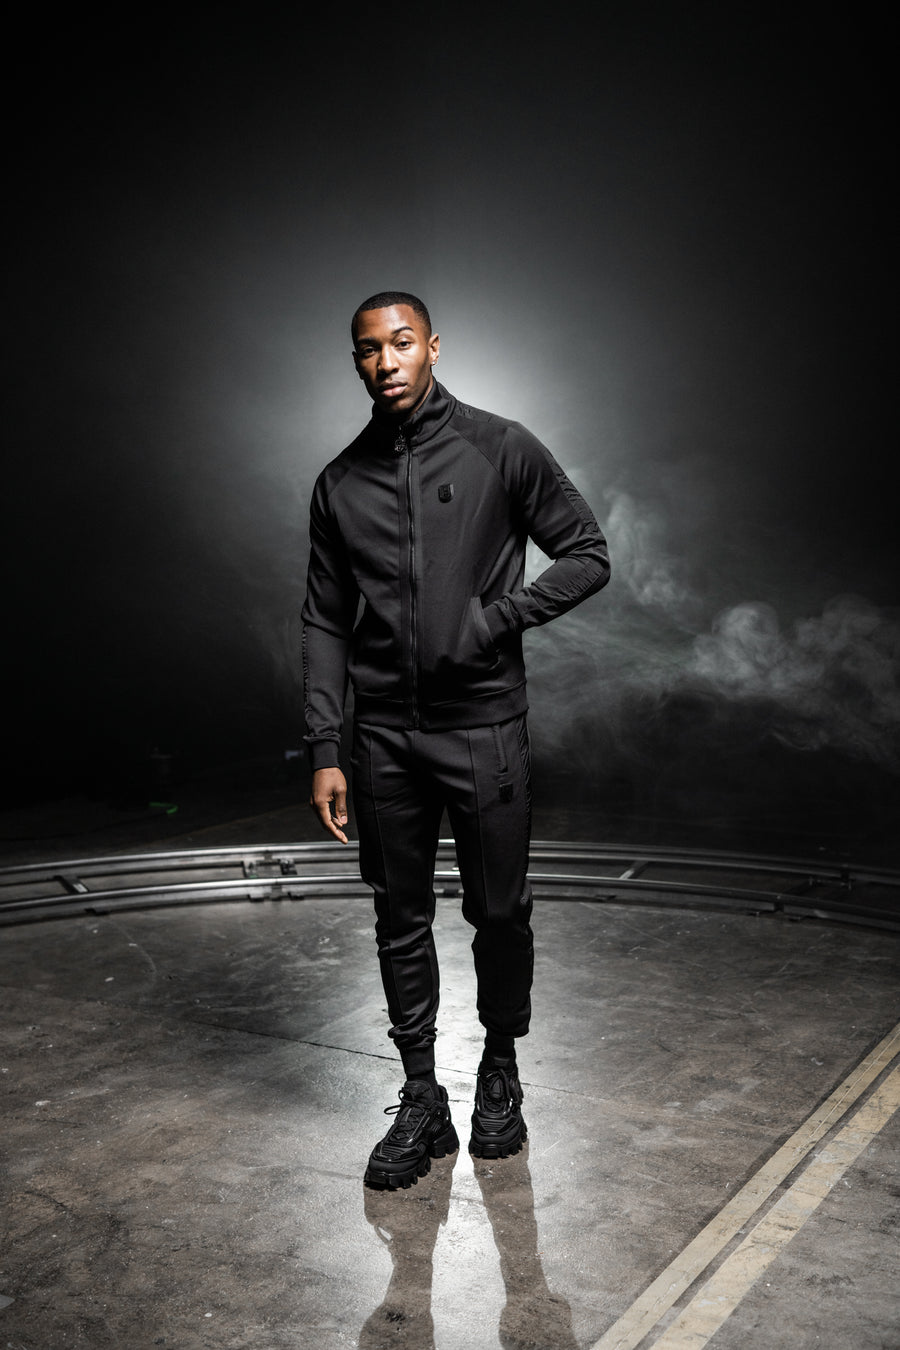 LUXE TRACK TOP (BLACK)